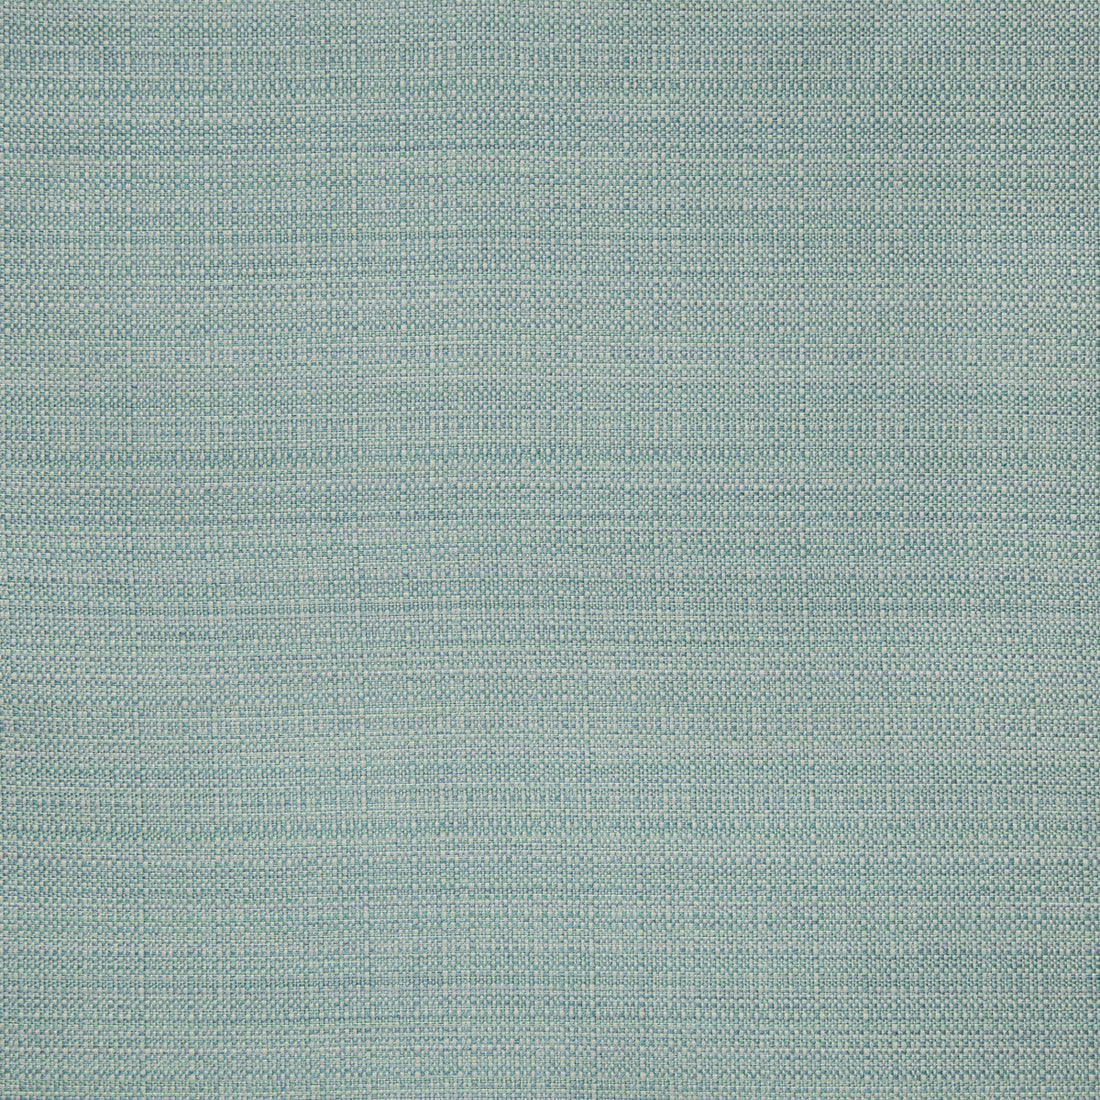 Arroyo fabric in surf color - pattern 35823.13.0 - by Kravet Design in the Indoor / Outdoor collection